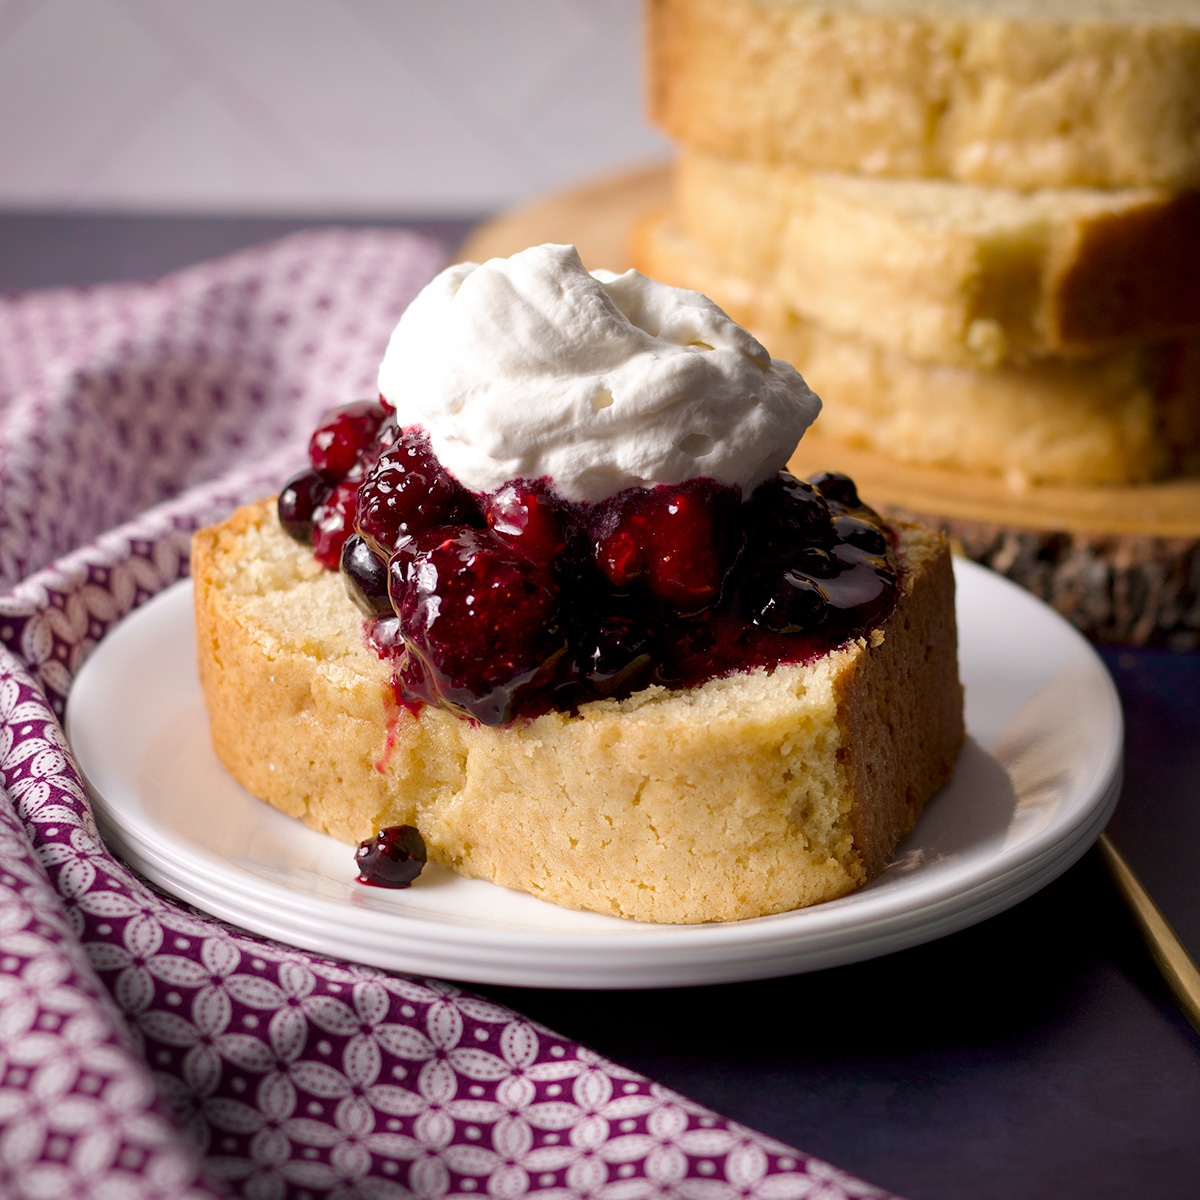 A slice of vanilla loaf cake topped with berry sauce and whipped cream.